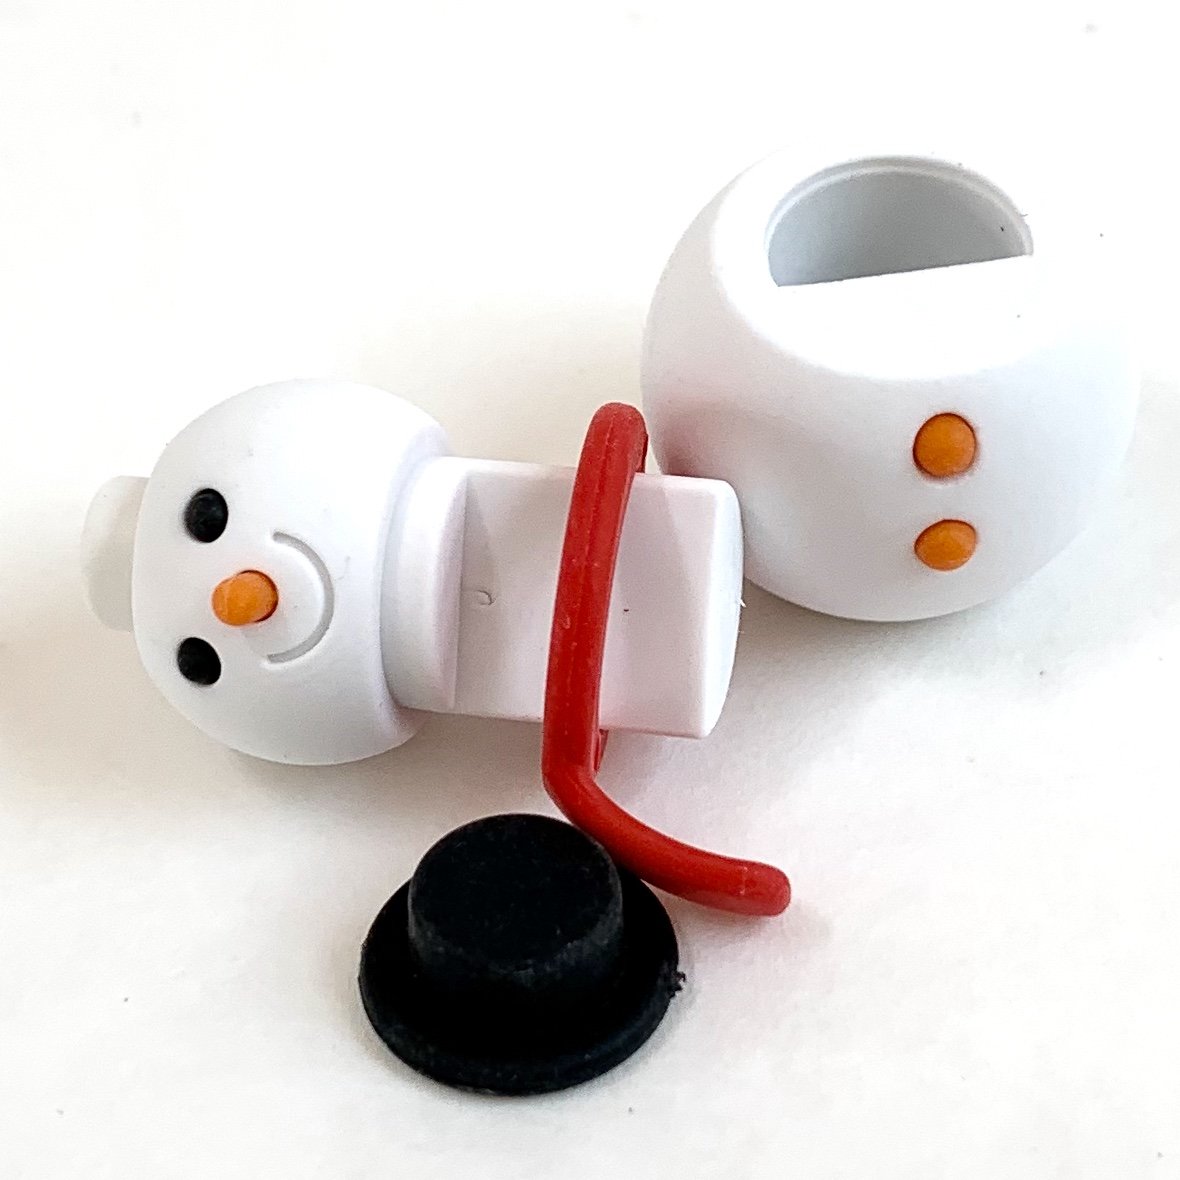 Snowman & Christmas Tree Erasers - A2Z Science & Learning Toy Store